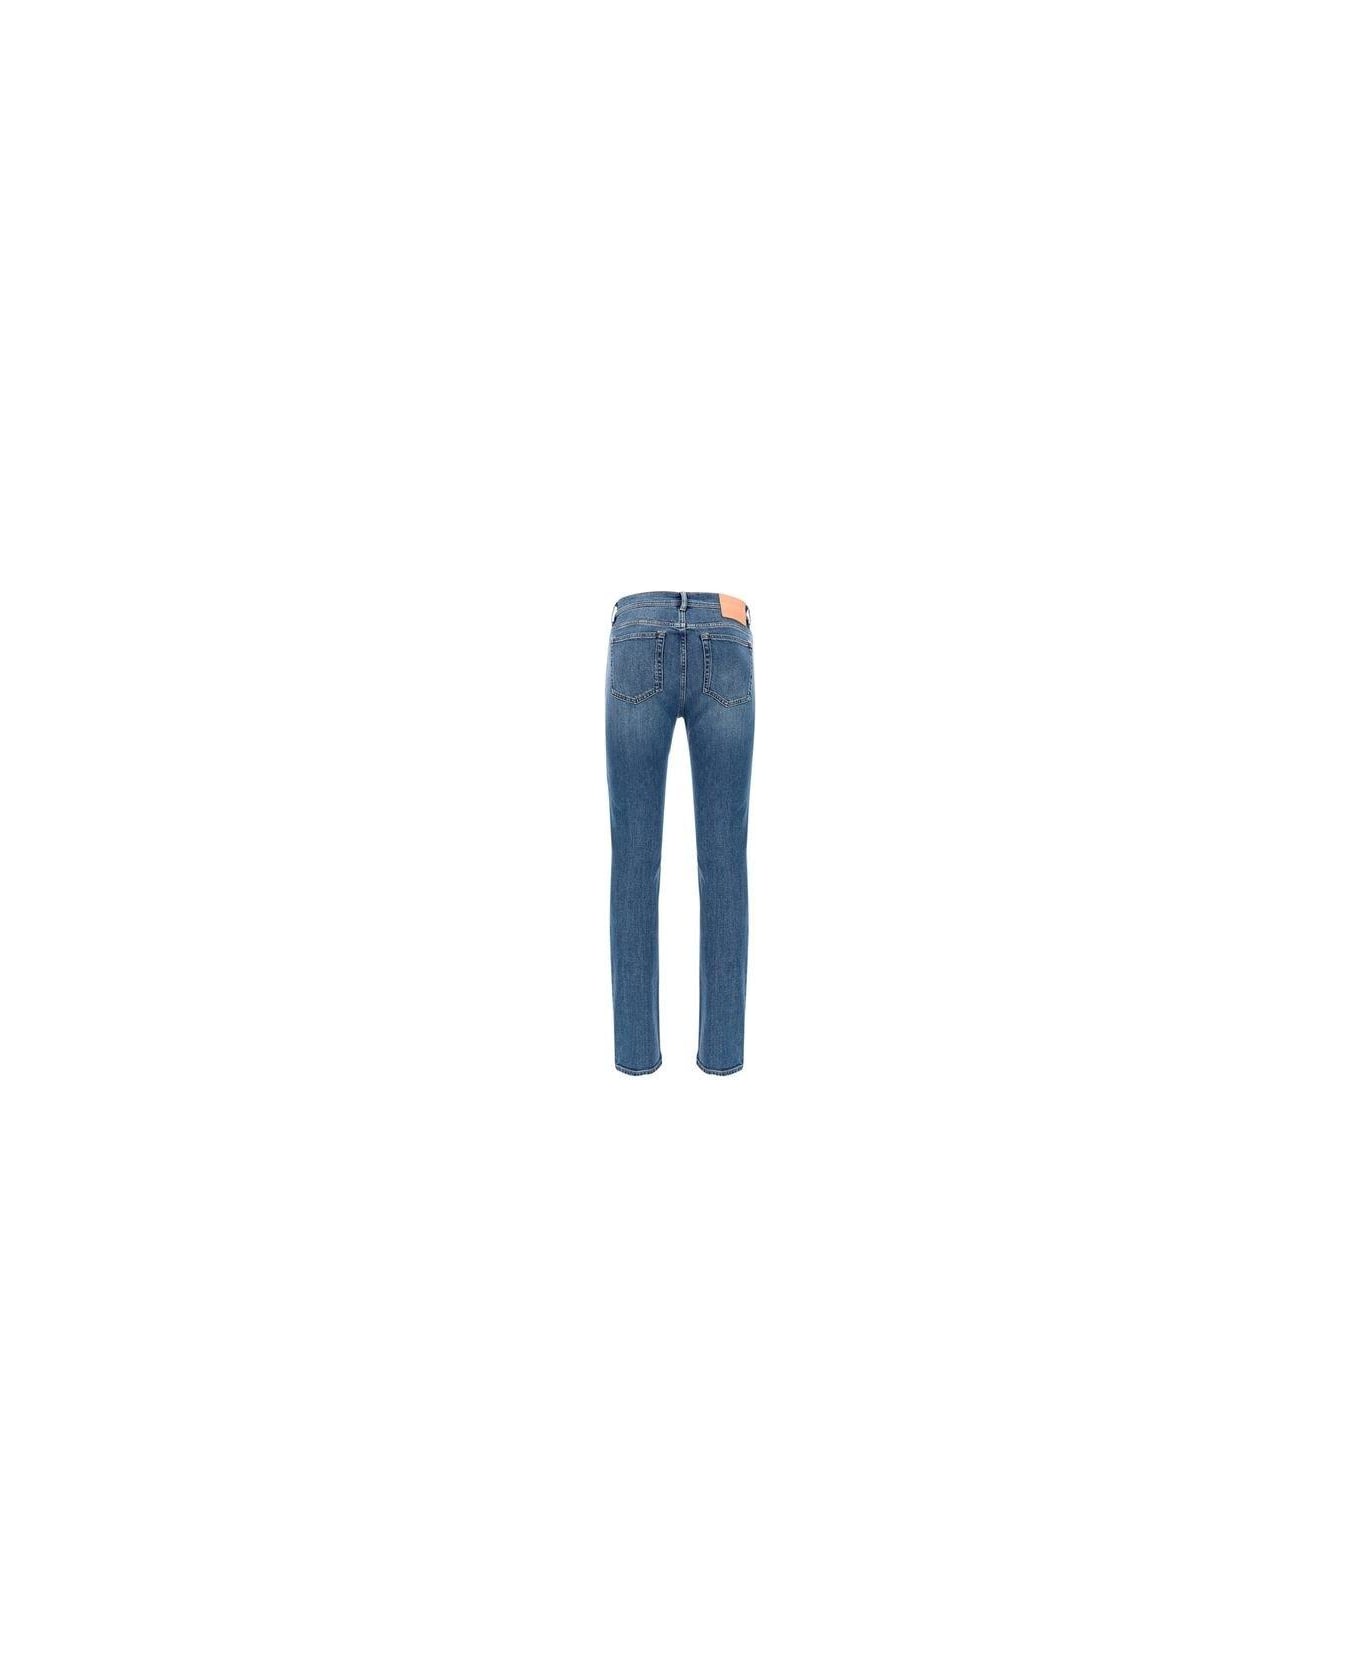 Acne Studios North Mid-rise Jeans - Mid Blue